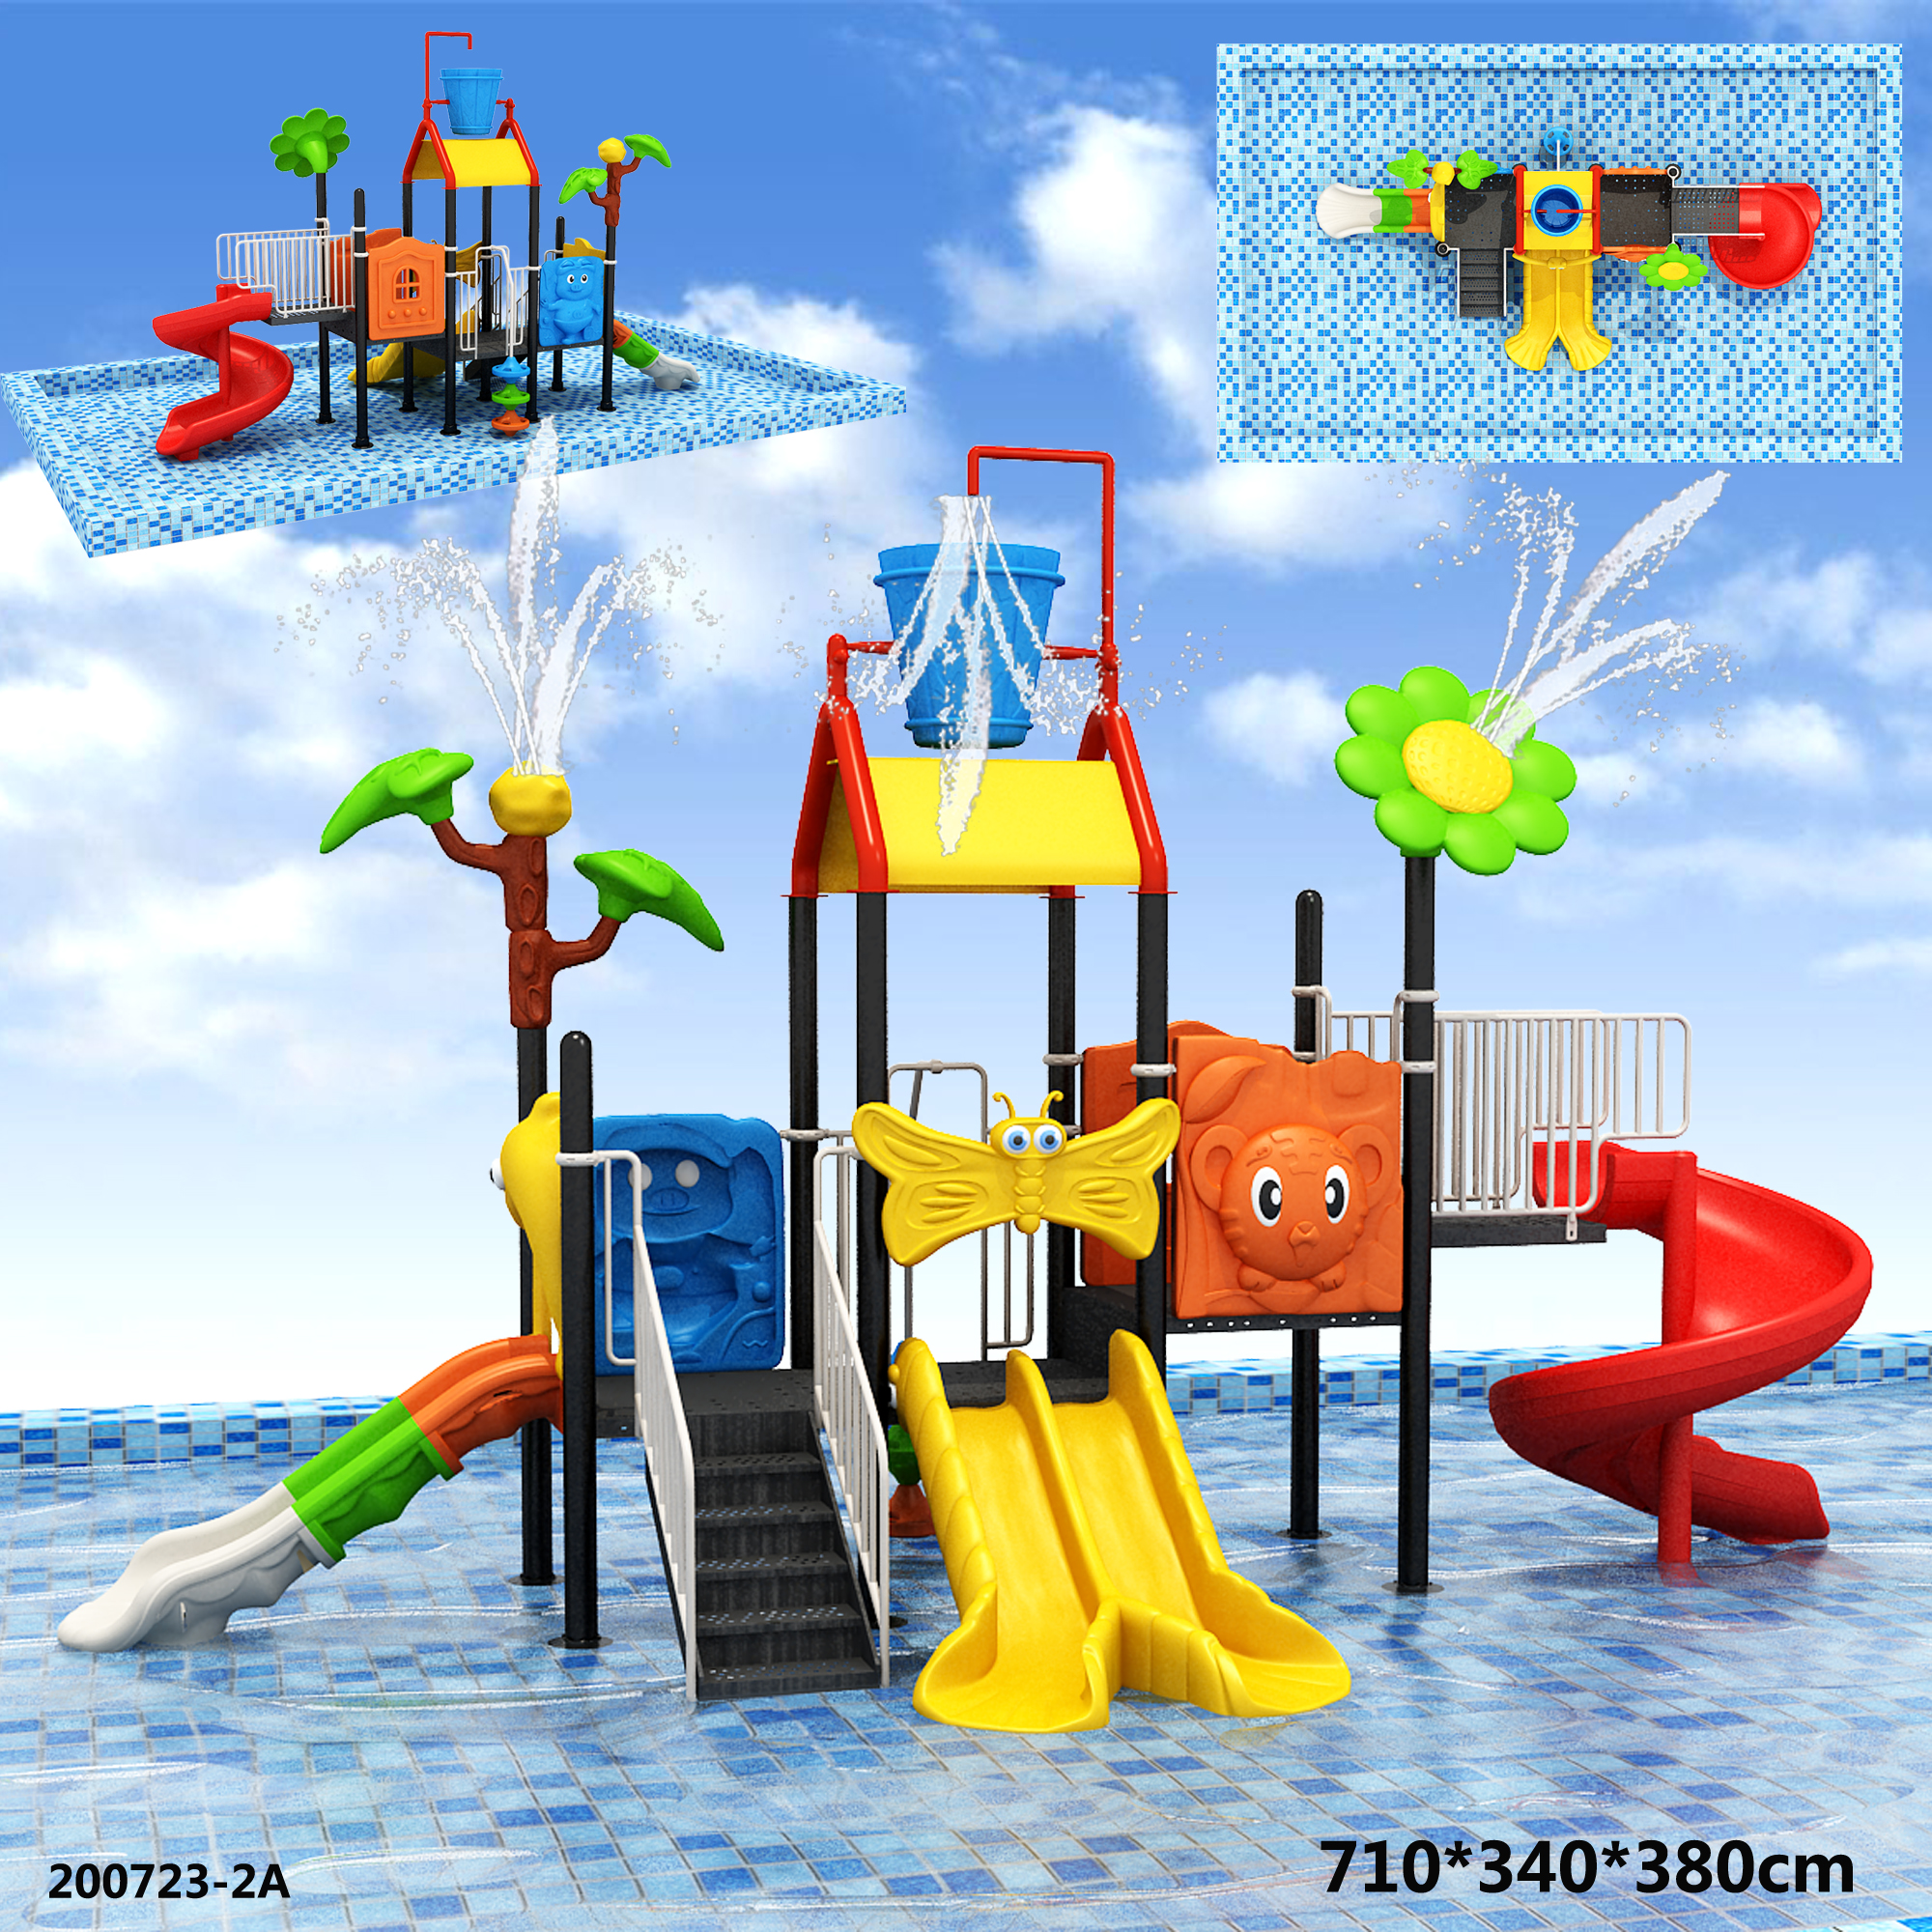 Outdoor water playground equipment installation of 7 tips